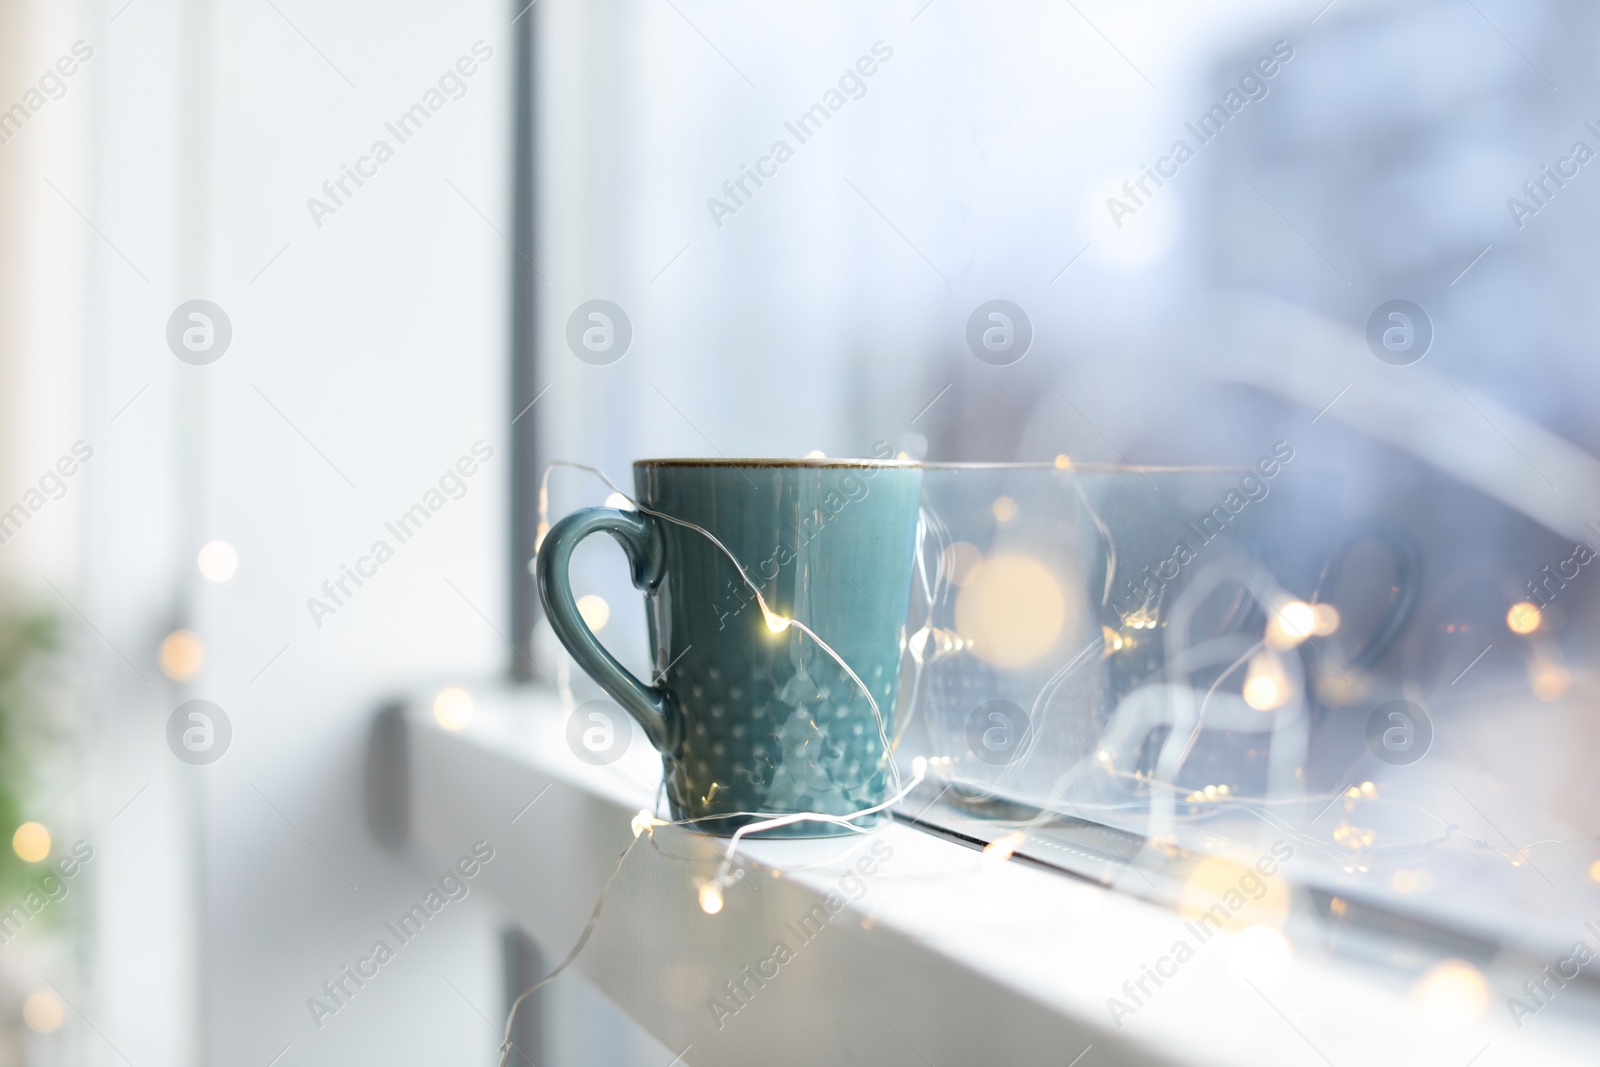 Photo of Cup of hot coffee near window indoors